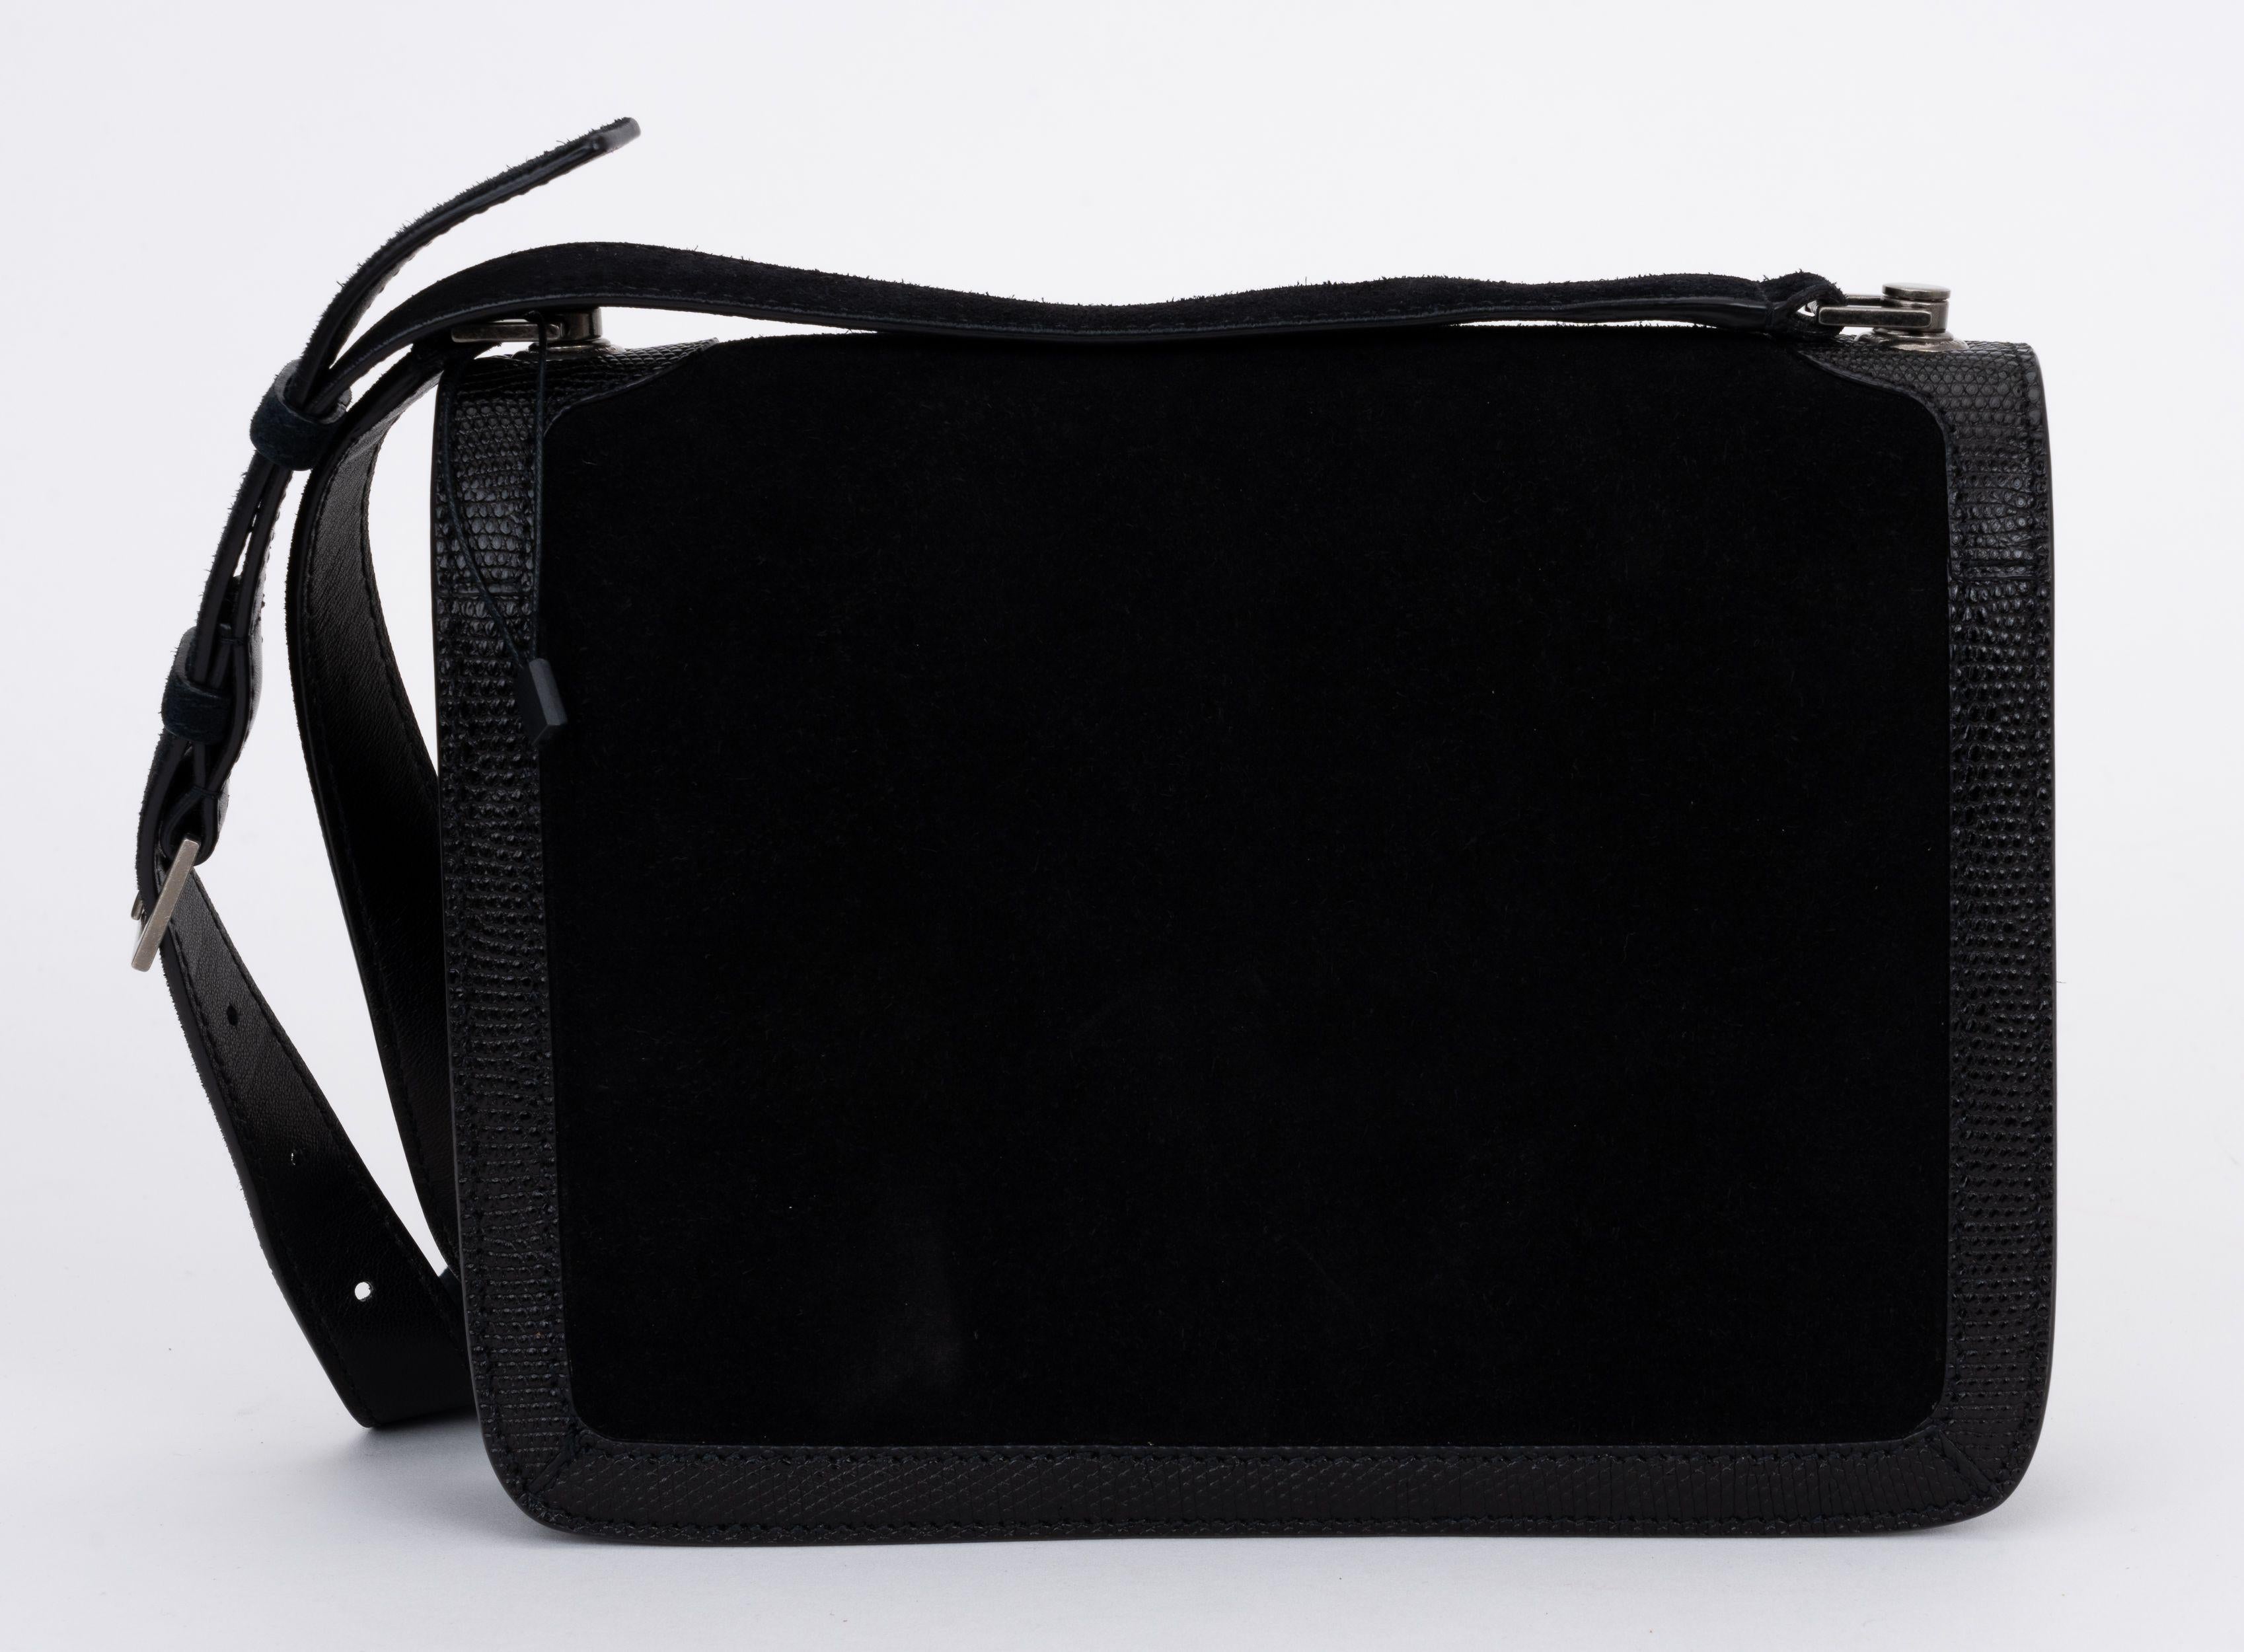 YSL New Black Suede Cross Body Bag For Sale 1